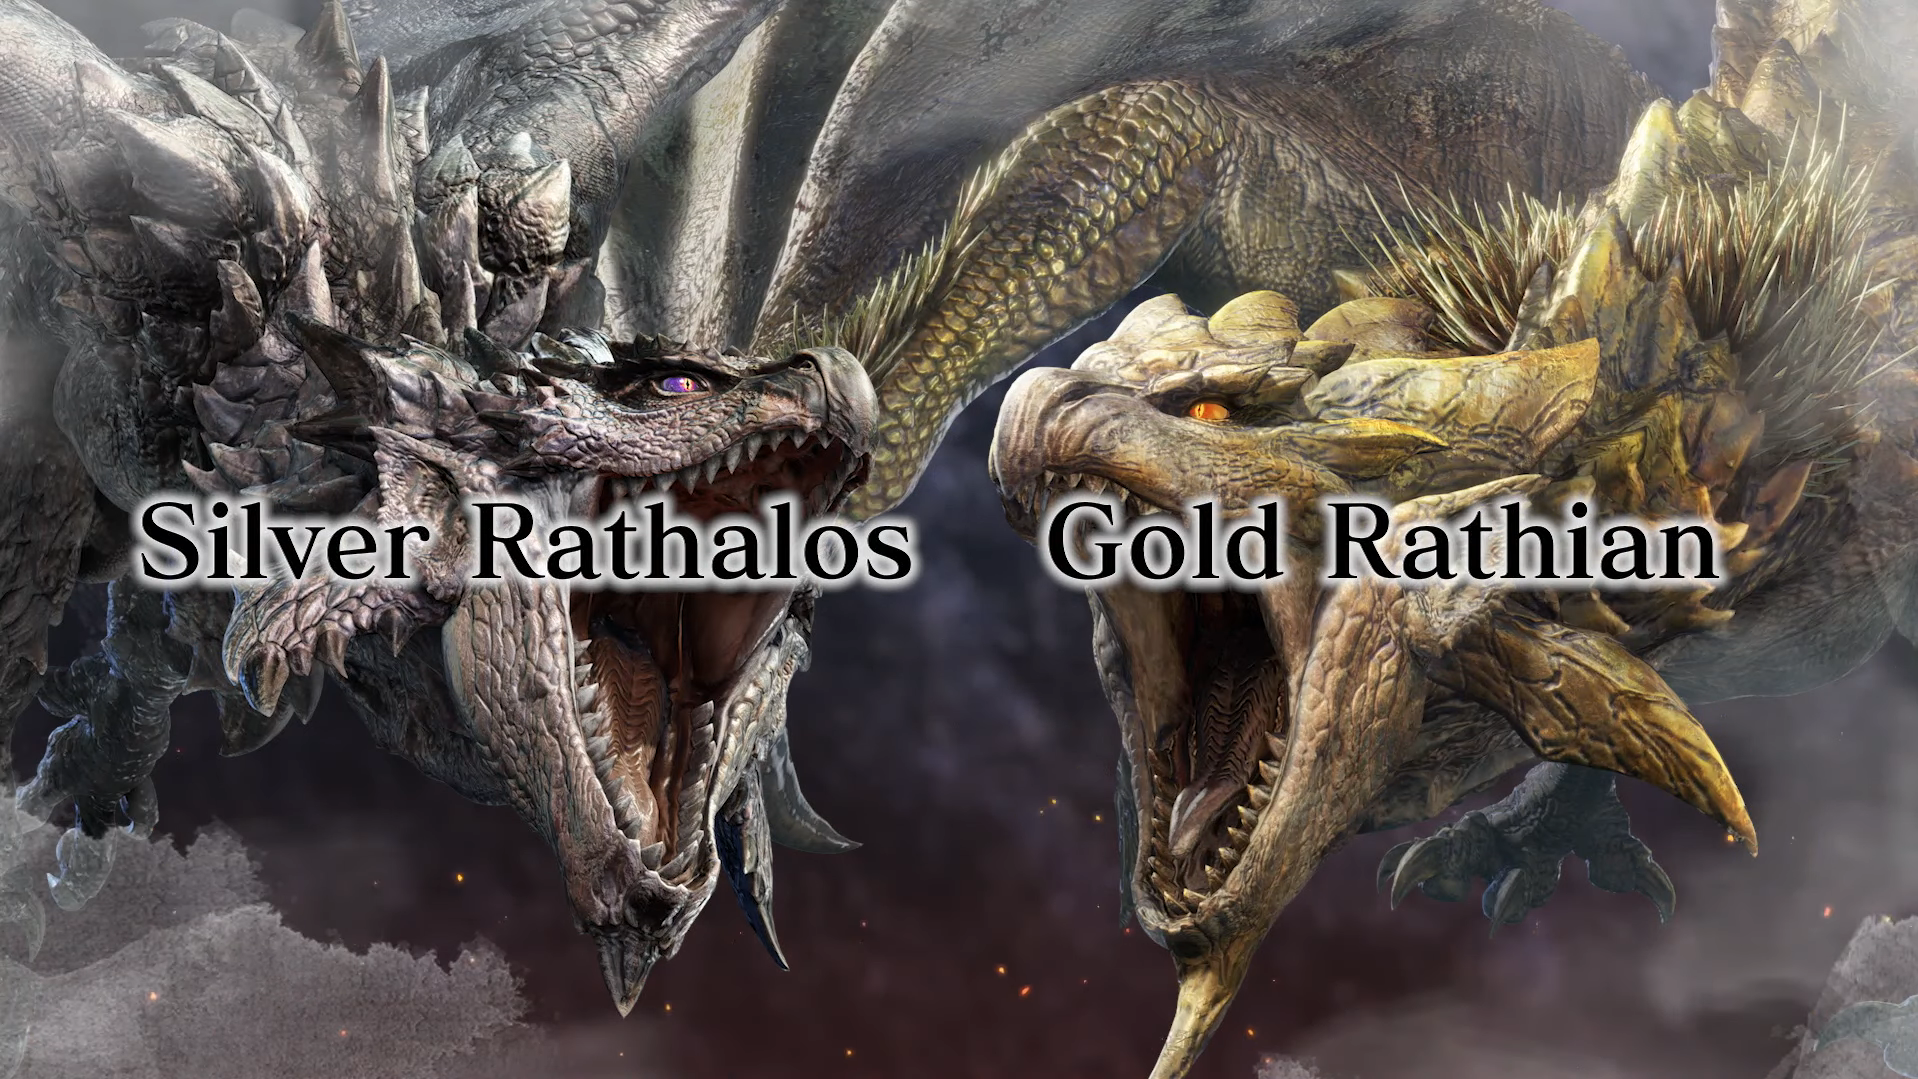 The Silver Rathalos and the Gold Rathian.